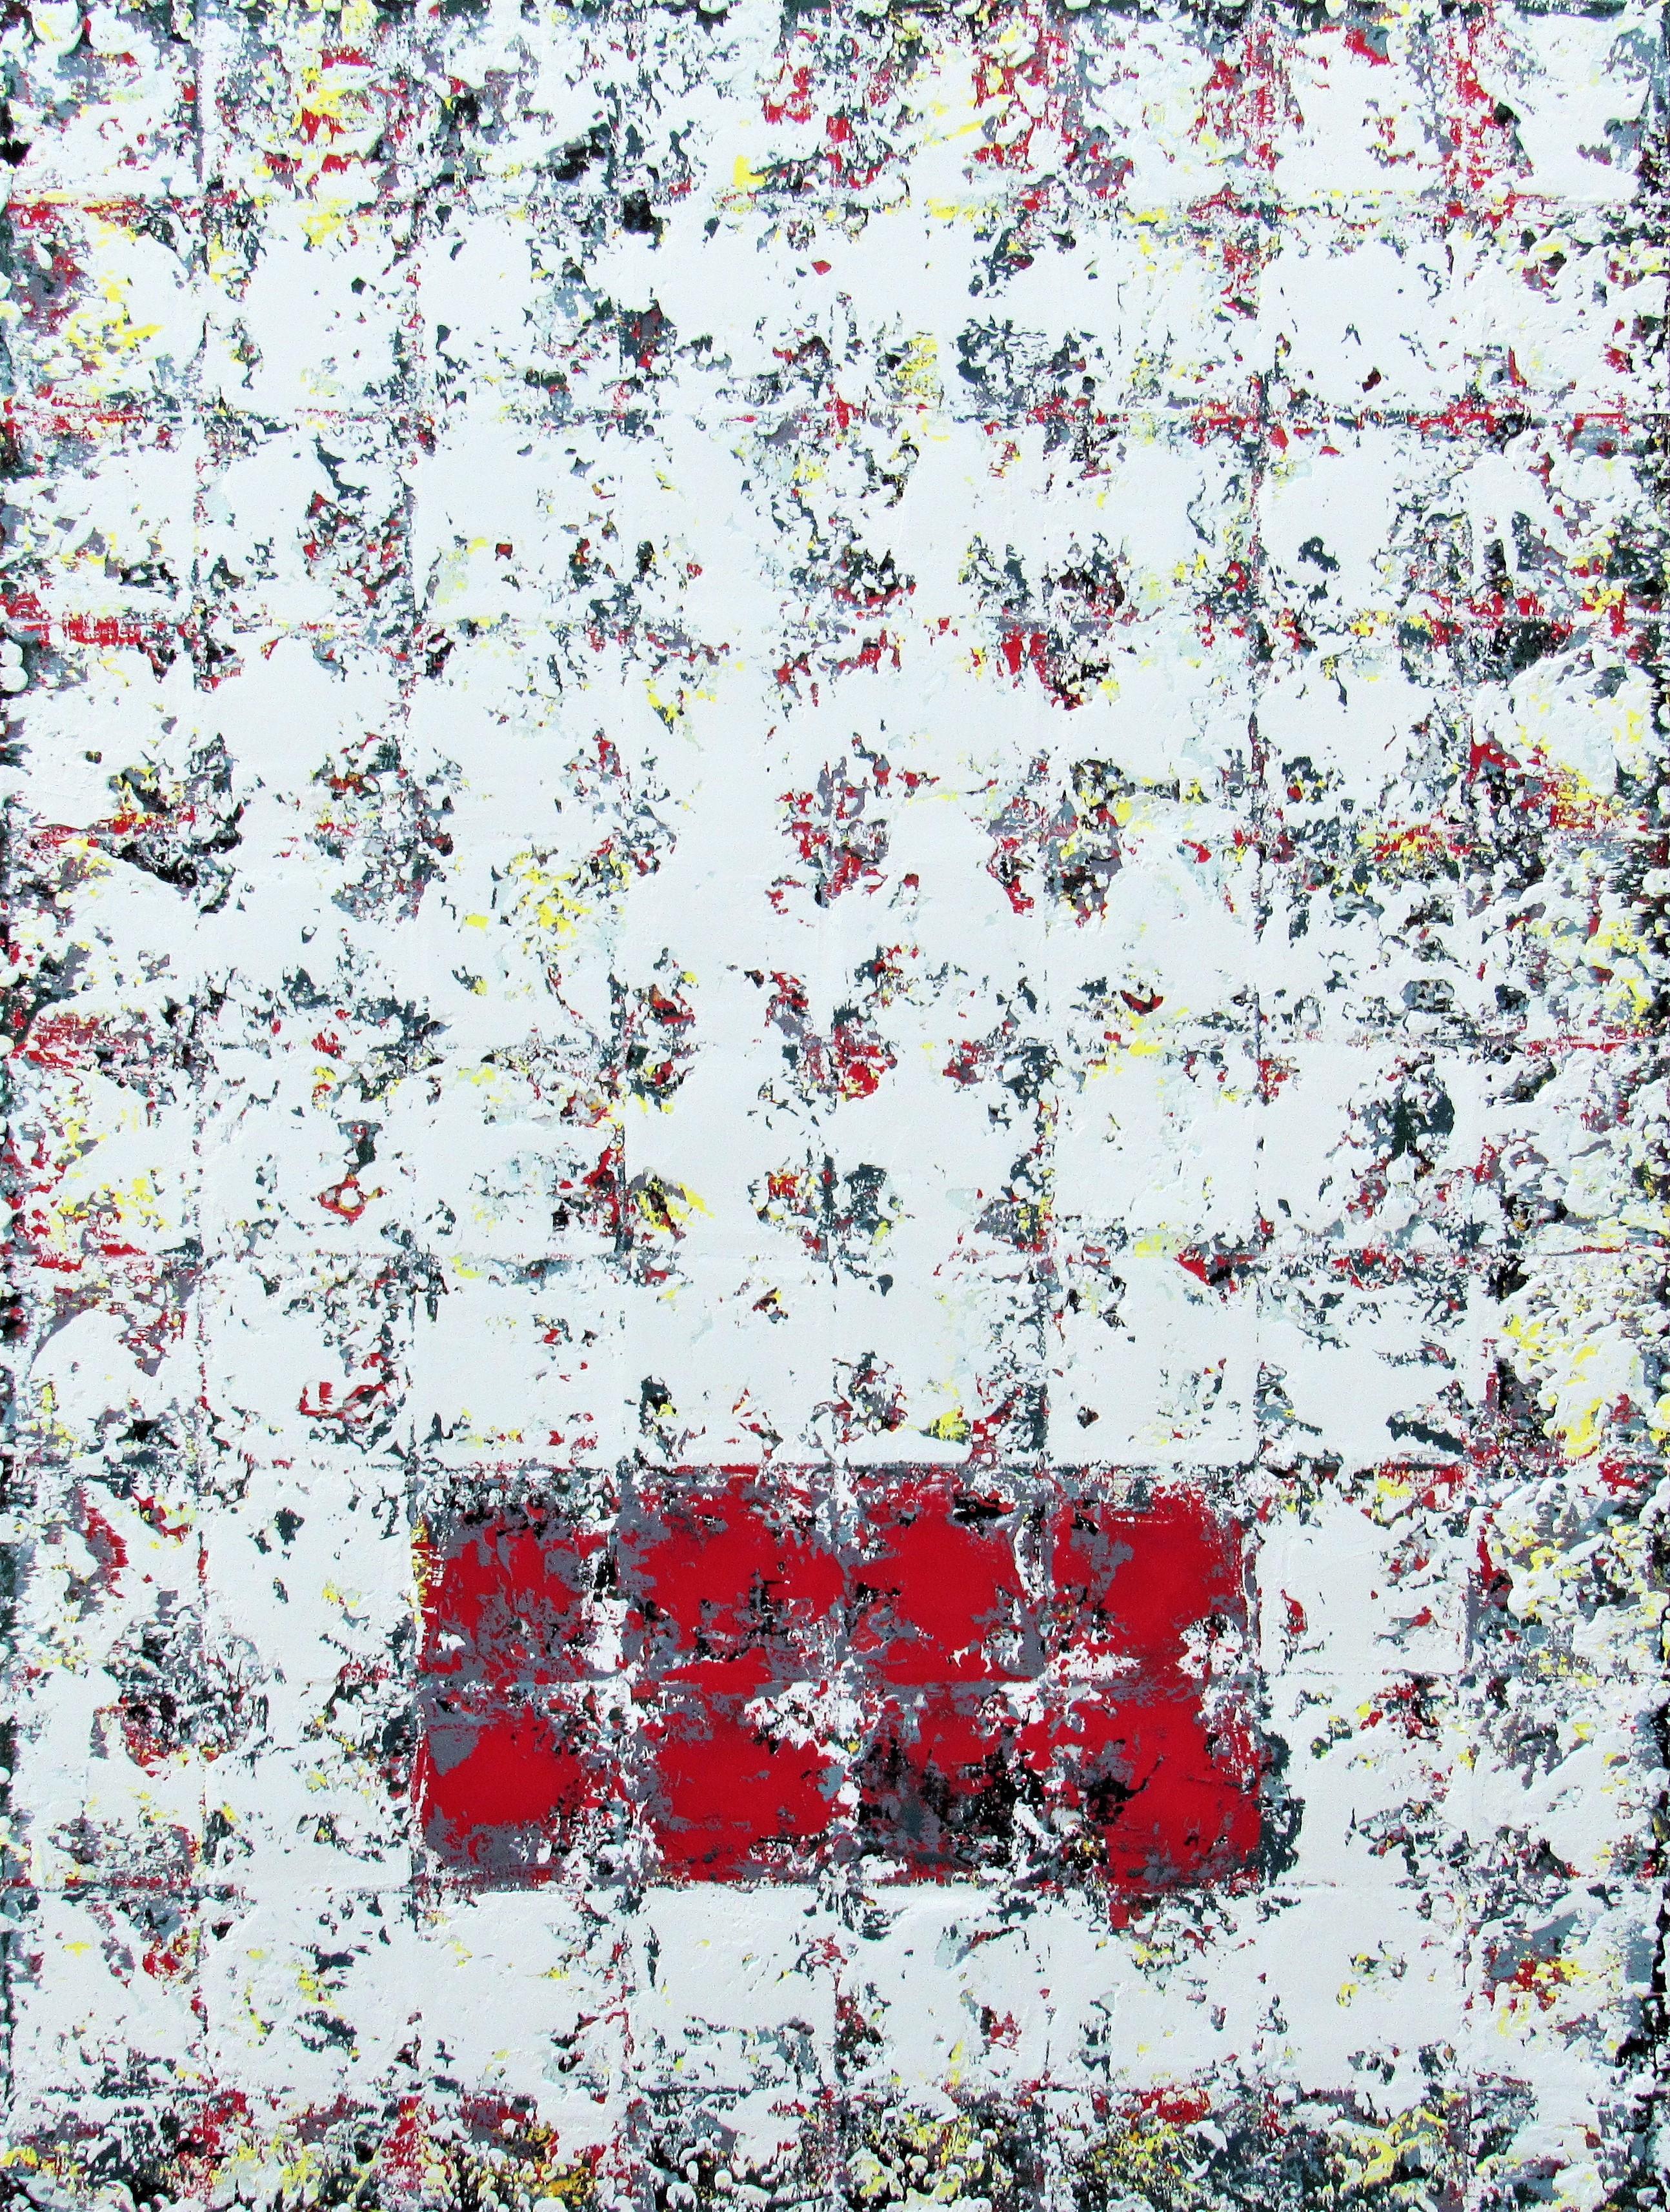 Brian Neish Abstract Painting - Ordeal - Urban Gray Geometric Squares: Oil on Canvas